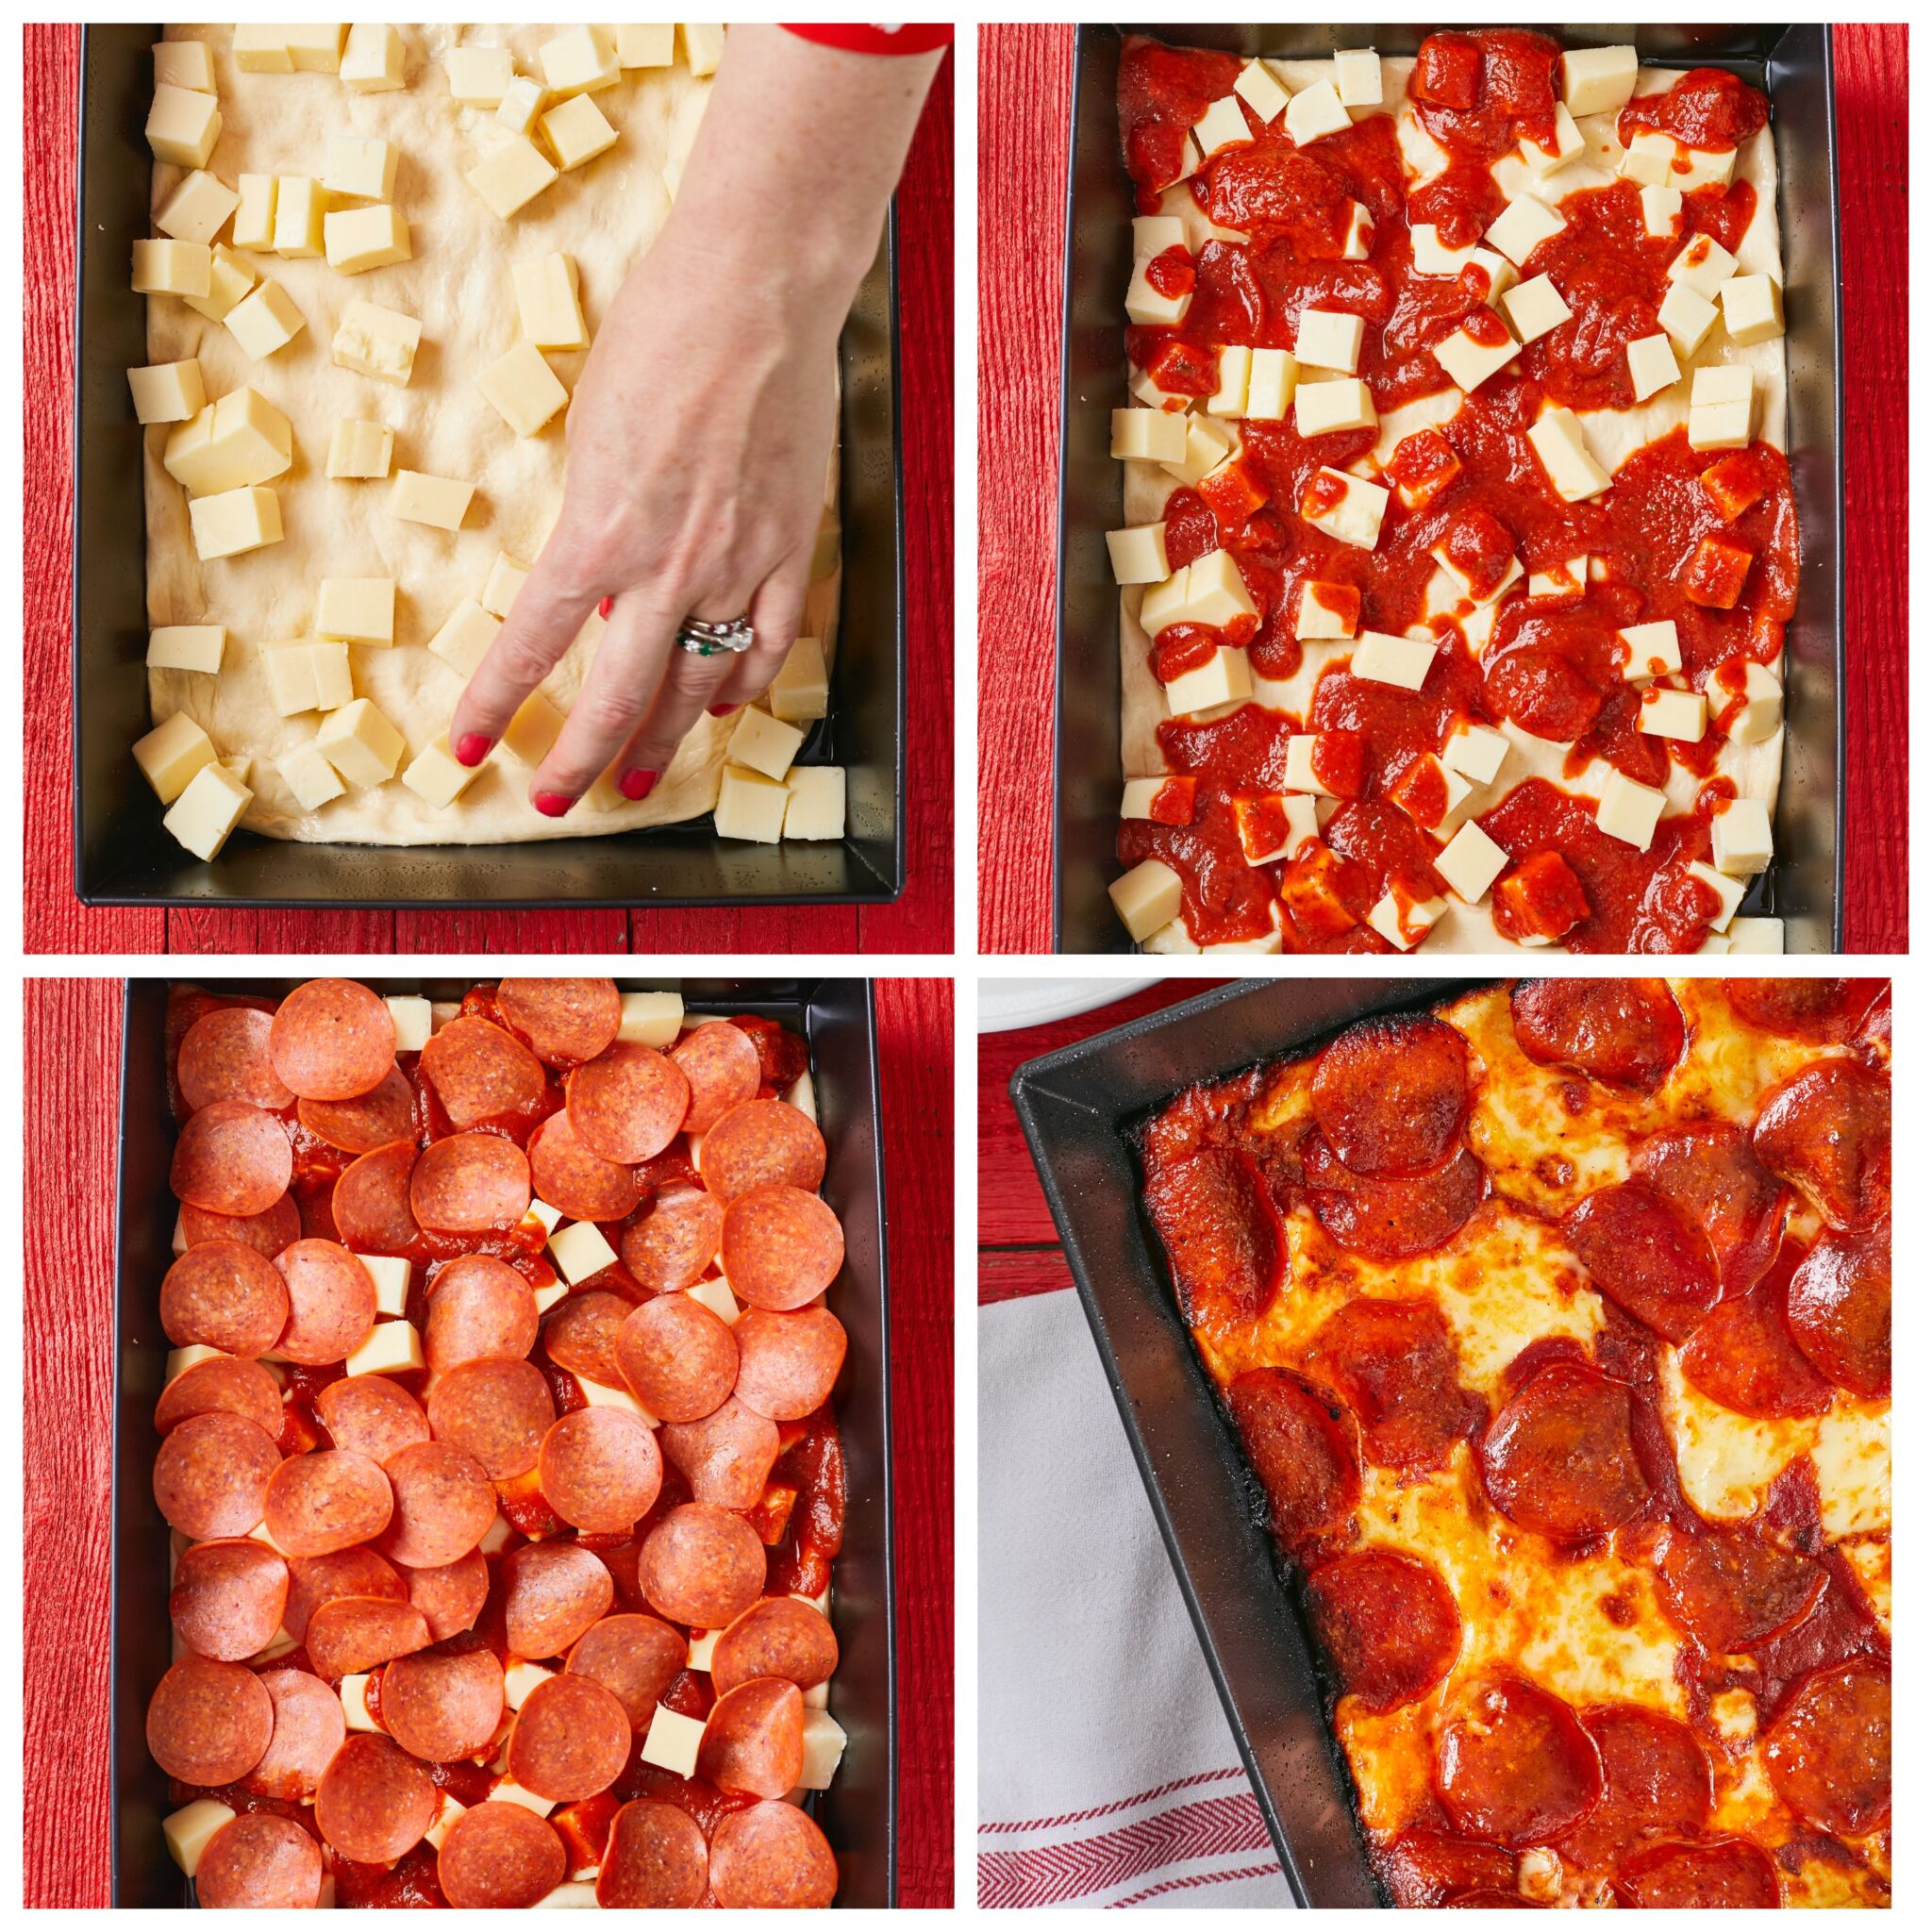 Assembling toppings for the pizza before baking. Start with cheese cubes sprinkled all the way to edges, then topped with pizza sauce and followed by thin pepperonis. It's baked until the edges are dark and caramelized and the cheese has browned. 